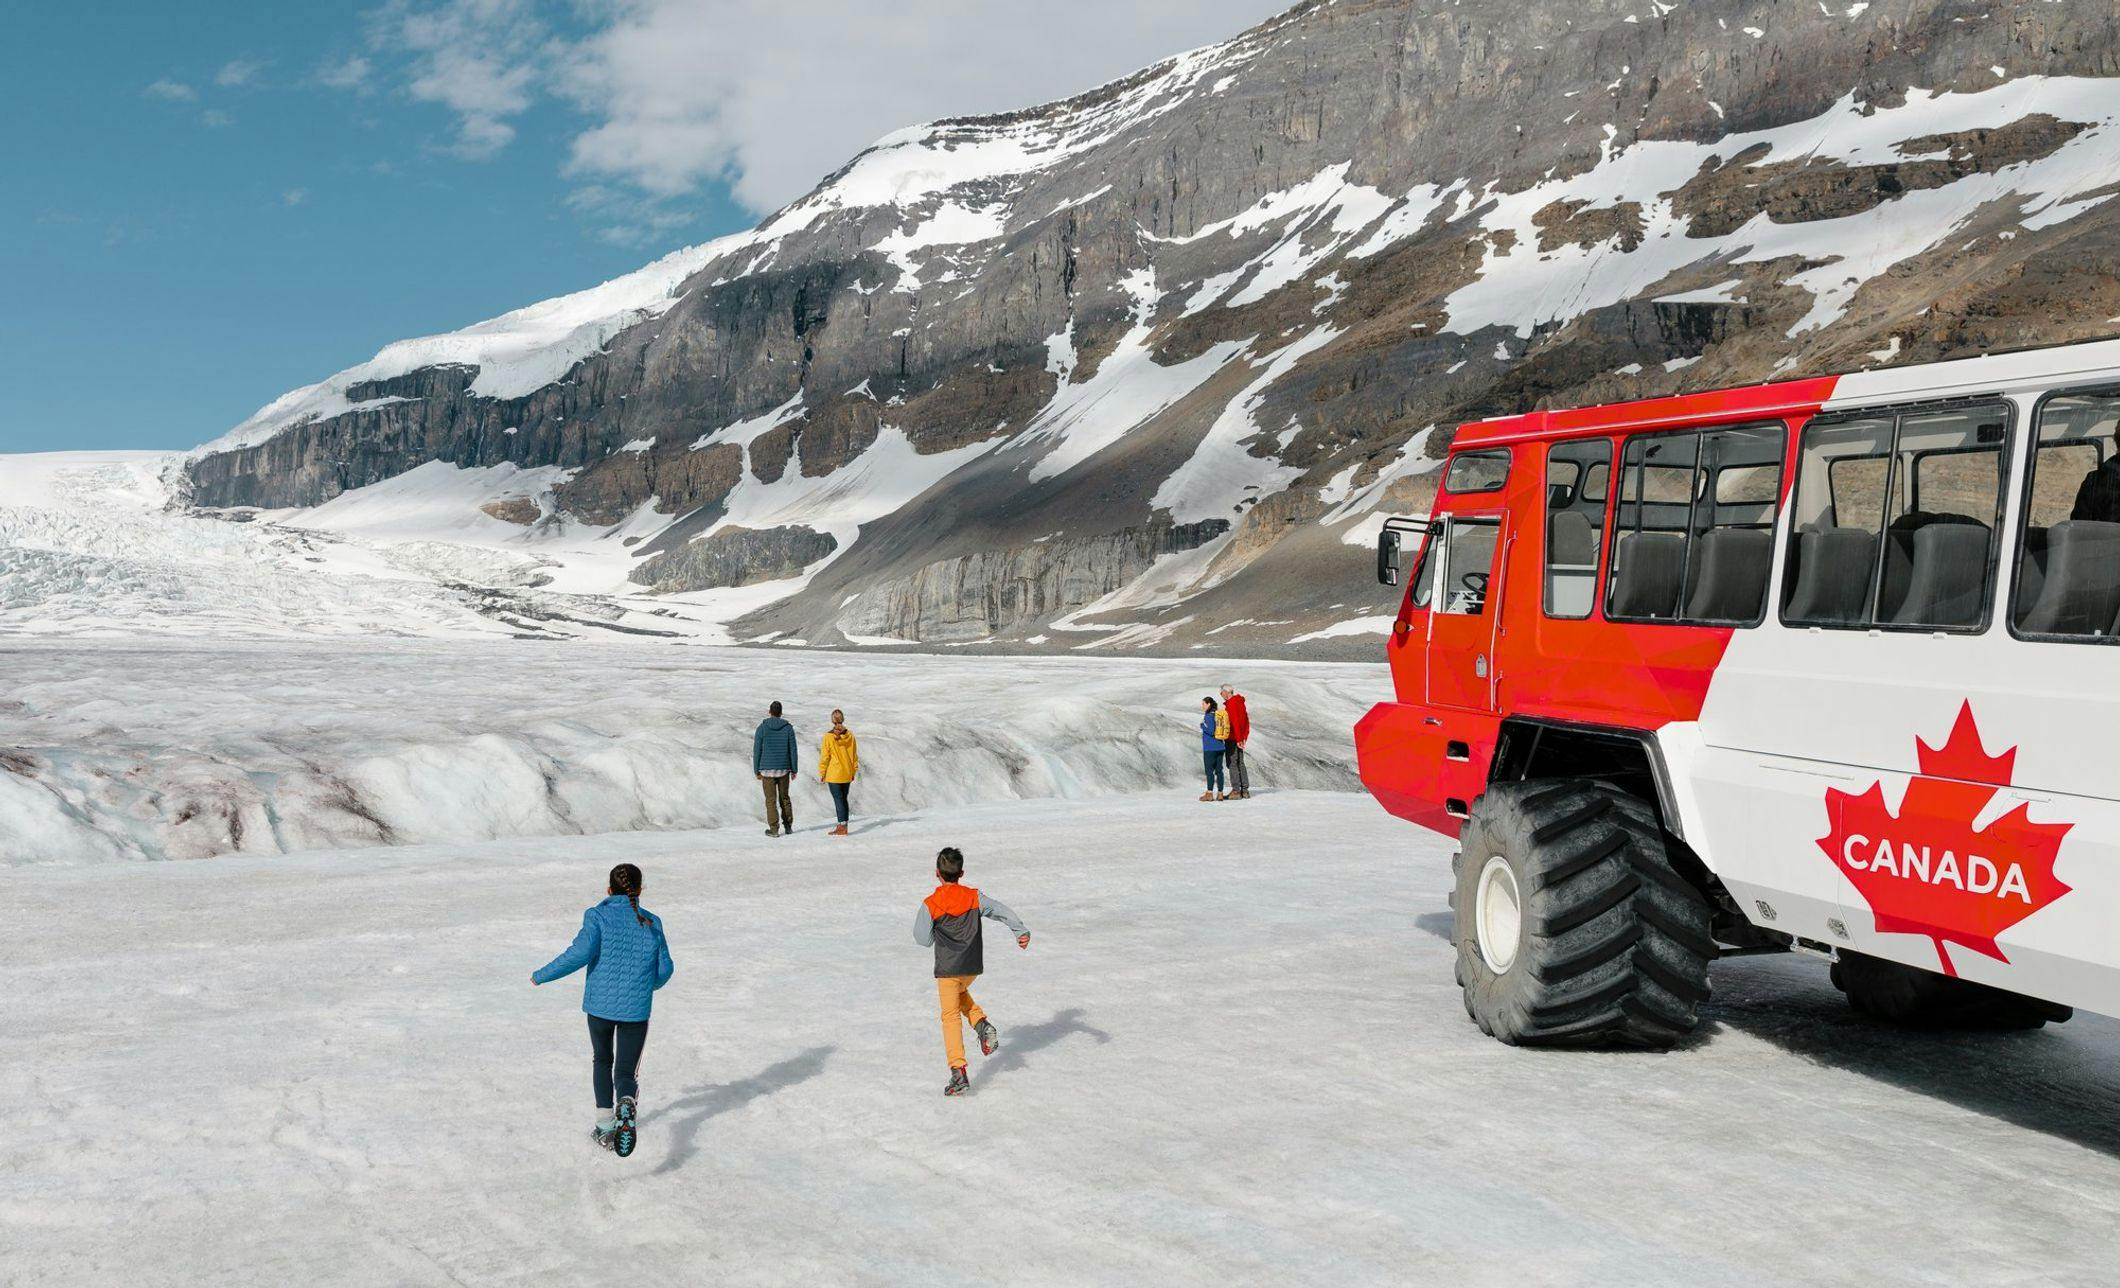 A family walks on a glacier after taking a bus pictured on the right to reach it